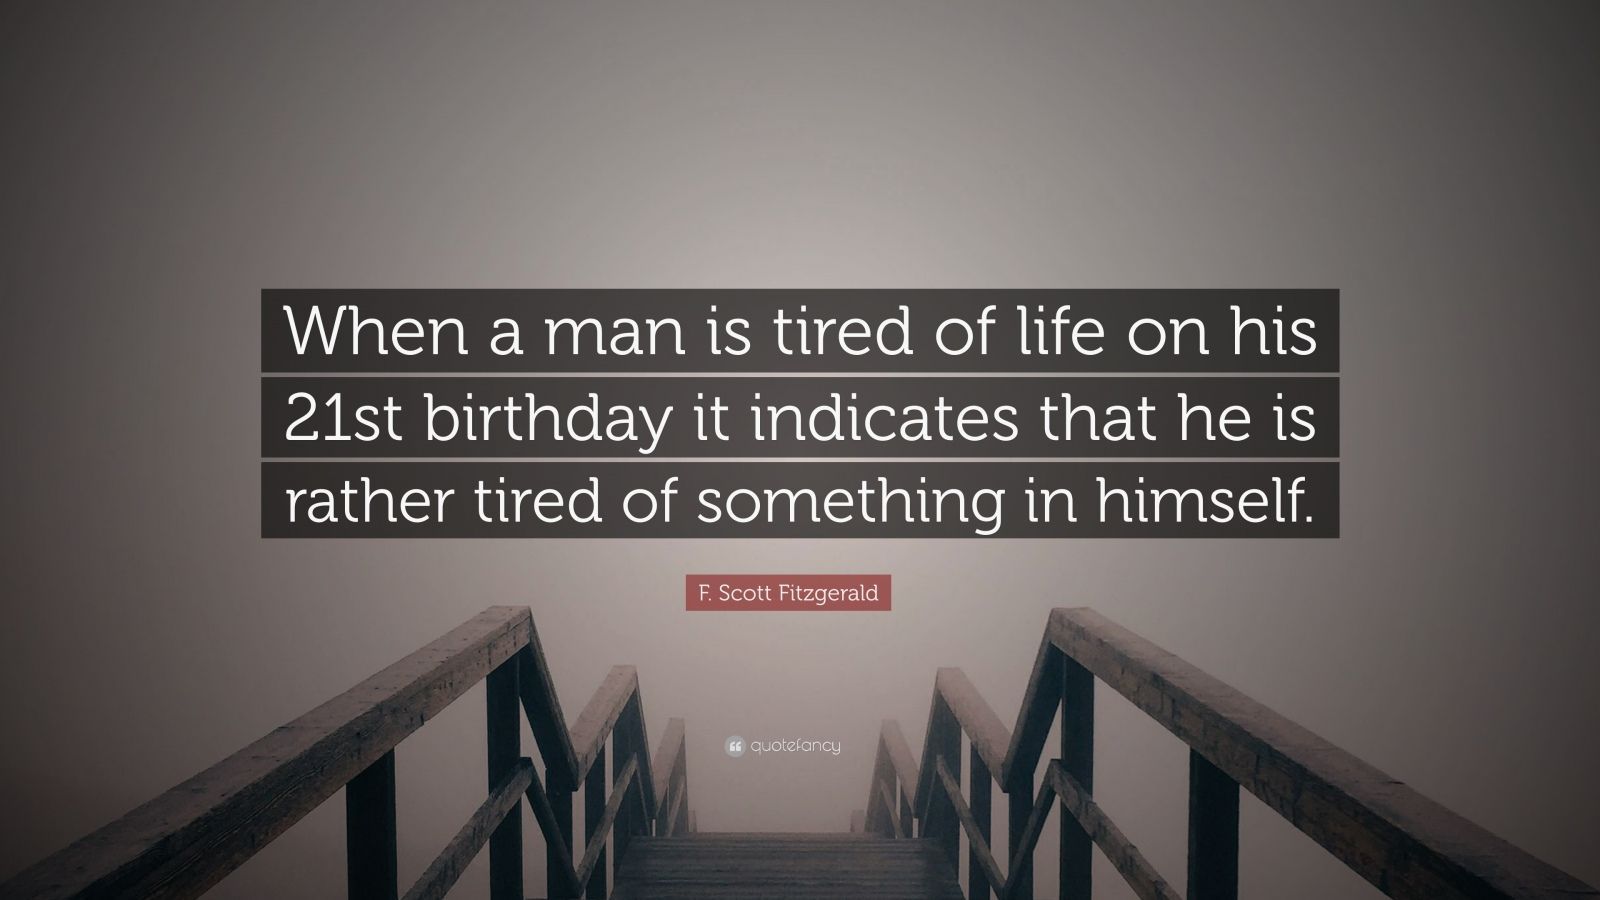 F. Scott Fitzgerald Quote: “When a man is tired of life on his 21st birthday it indicates that he is rather tired of something in himself.” (10 wallpaper)